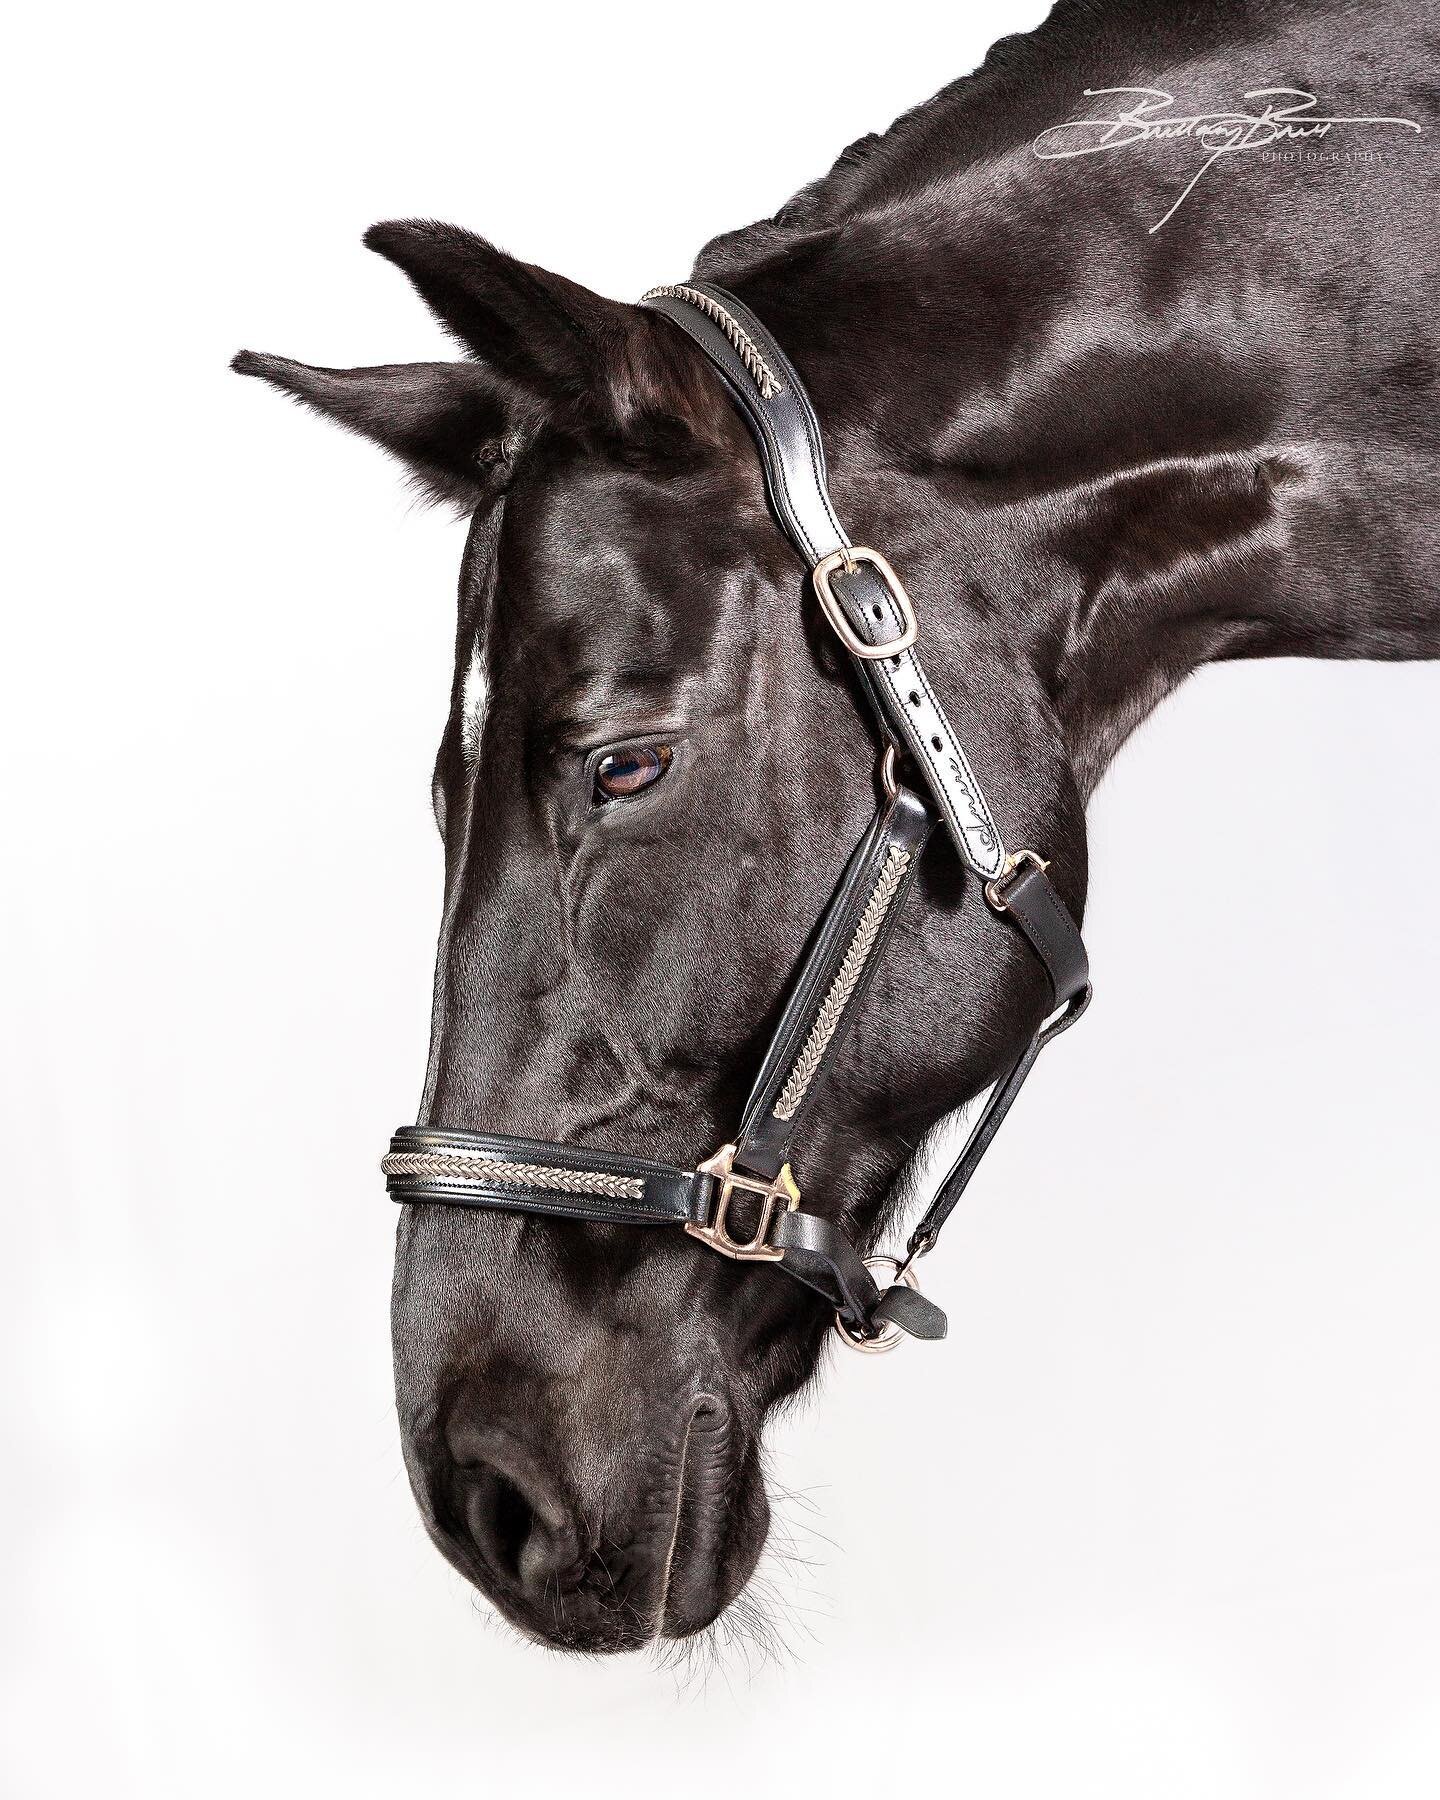 Lovingly looking at his human, @candoitstables 
.
detail swipe right. full composition, see studio highlights 
.
#equinephotography #equineart #equinesofinstagram #instahorse #horsesofinstagram #instaequine #instaequestrian #equineportrait #equinepor